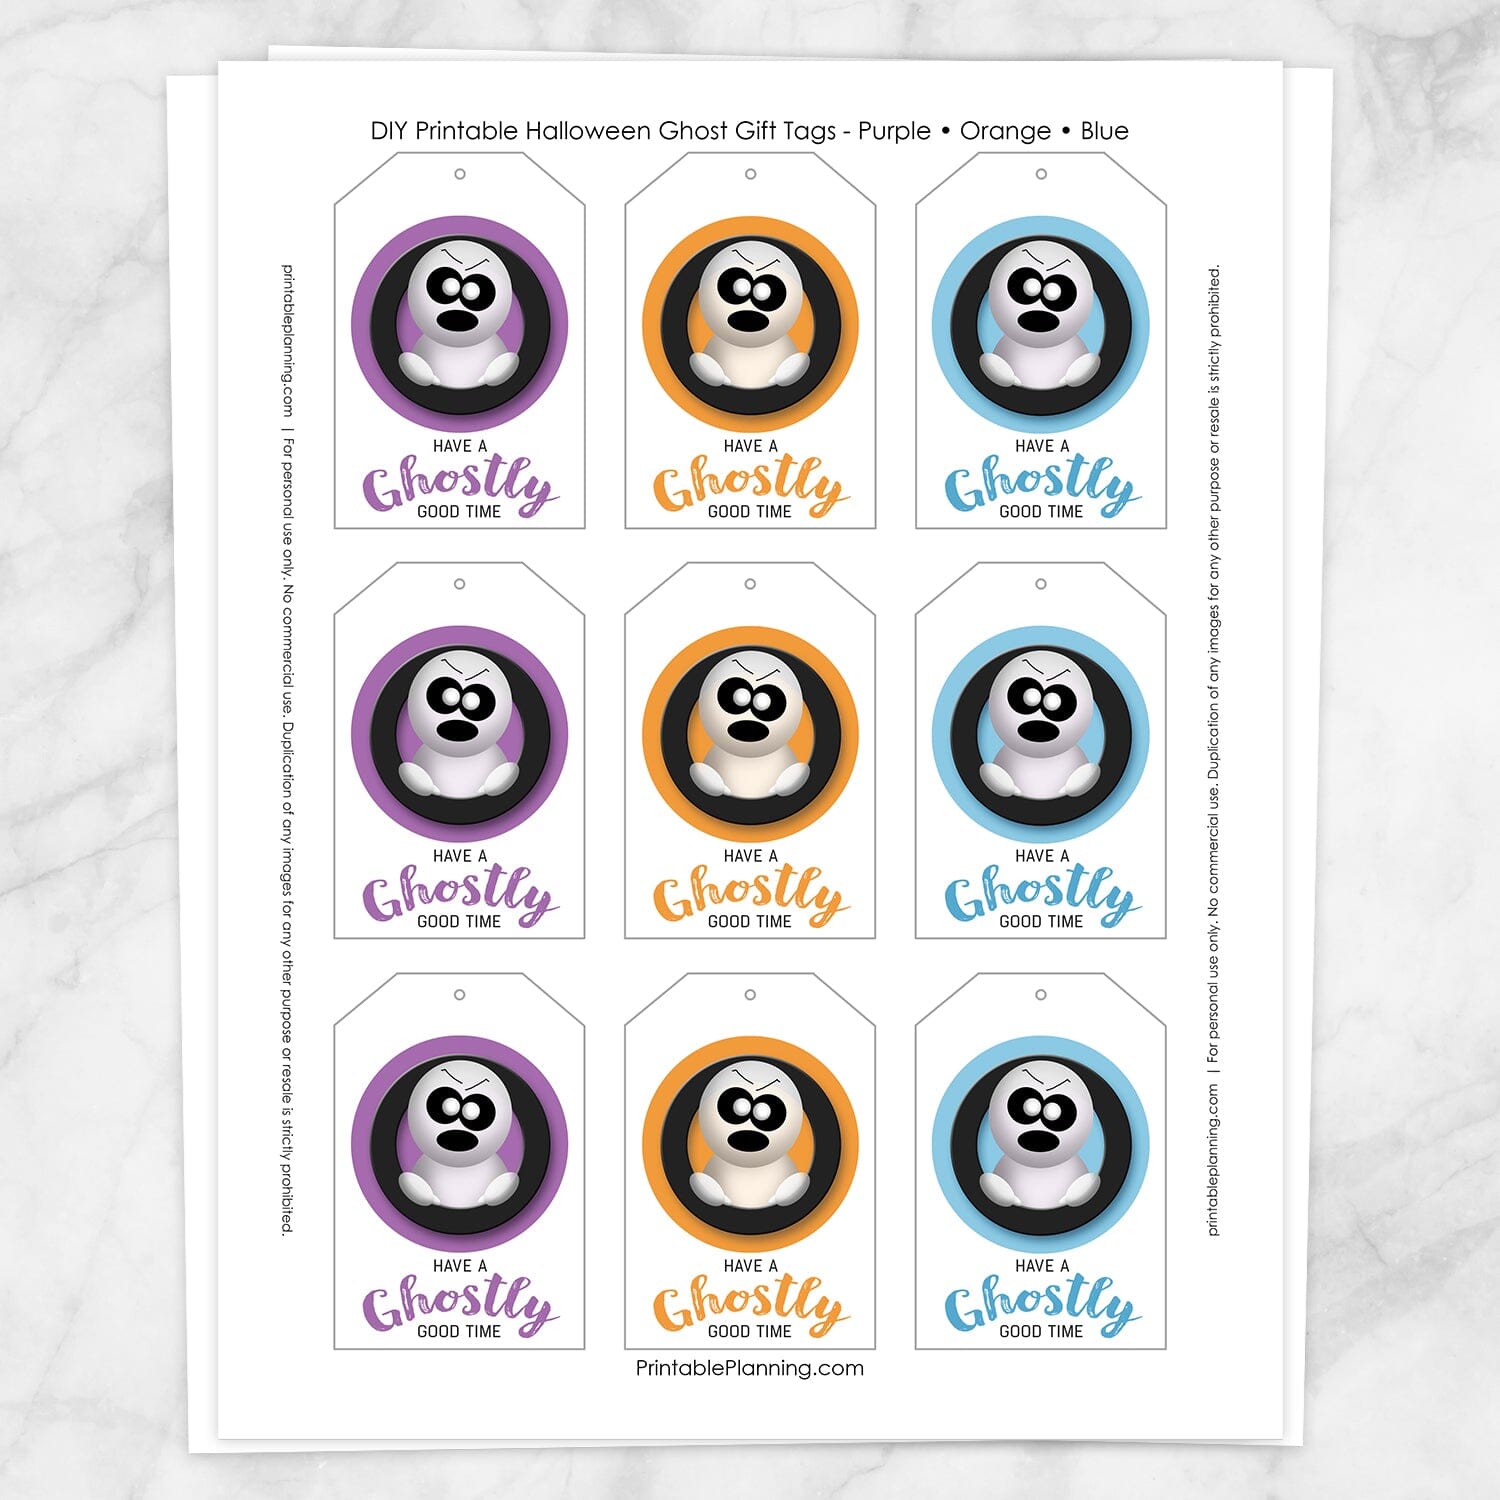 Printable Halloween Ghost Gift Tags - Purple Orange Blue at Printable Planning. Sheet of 9 gift tags.